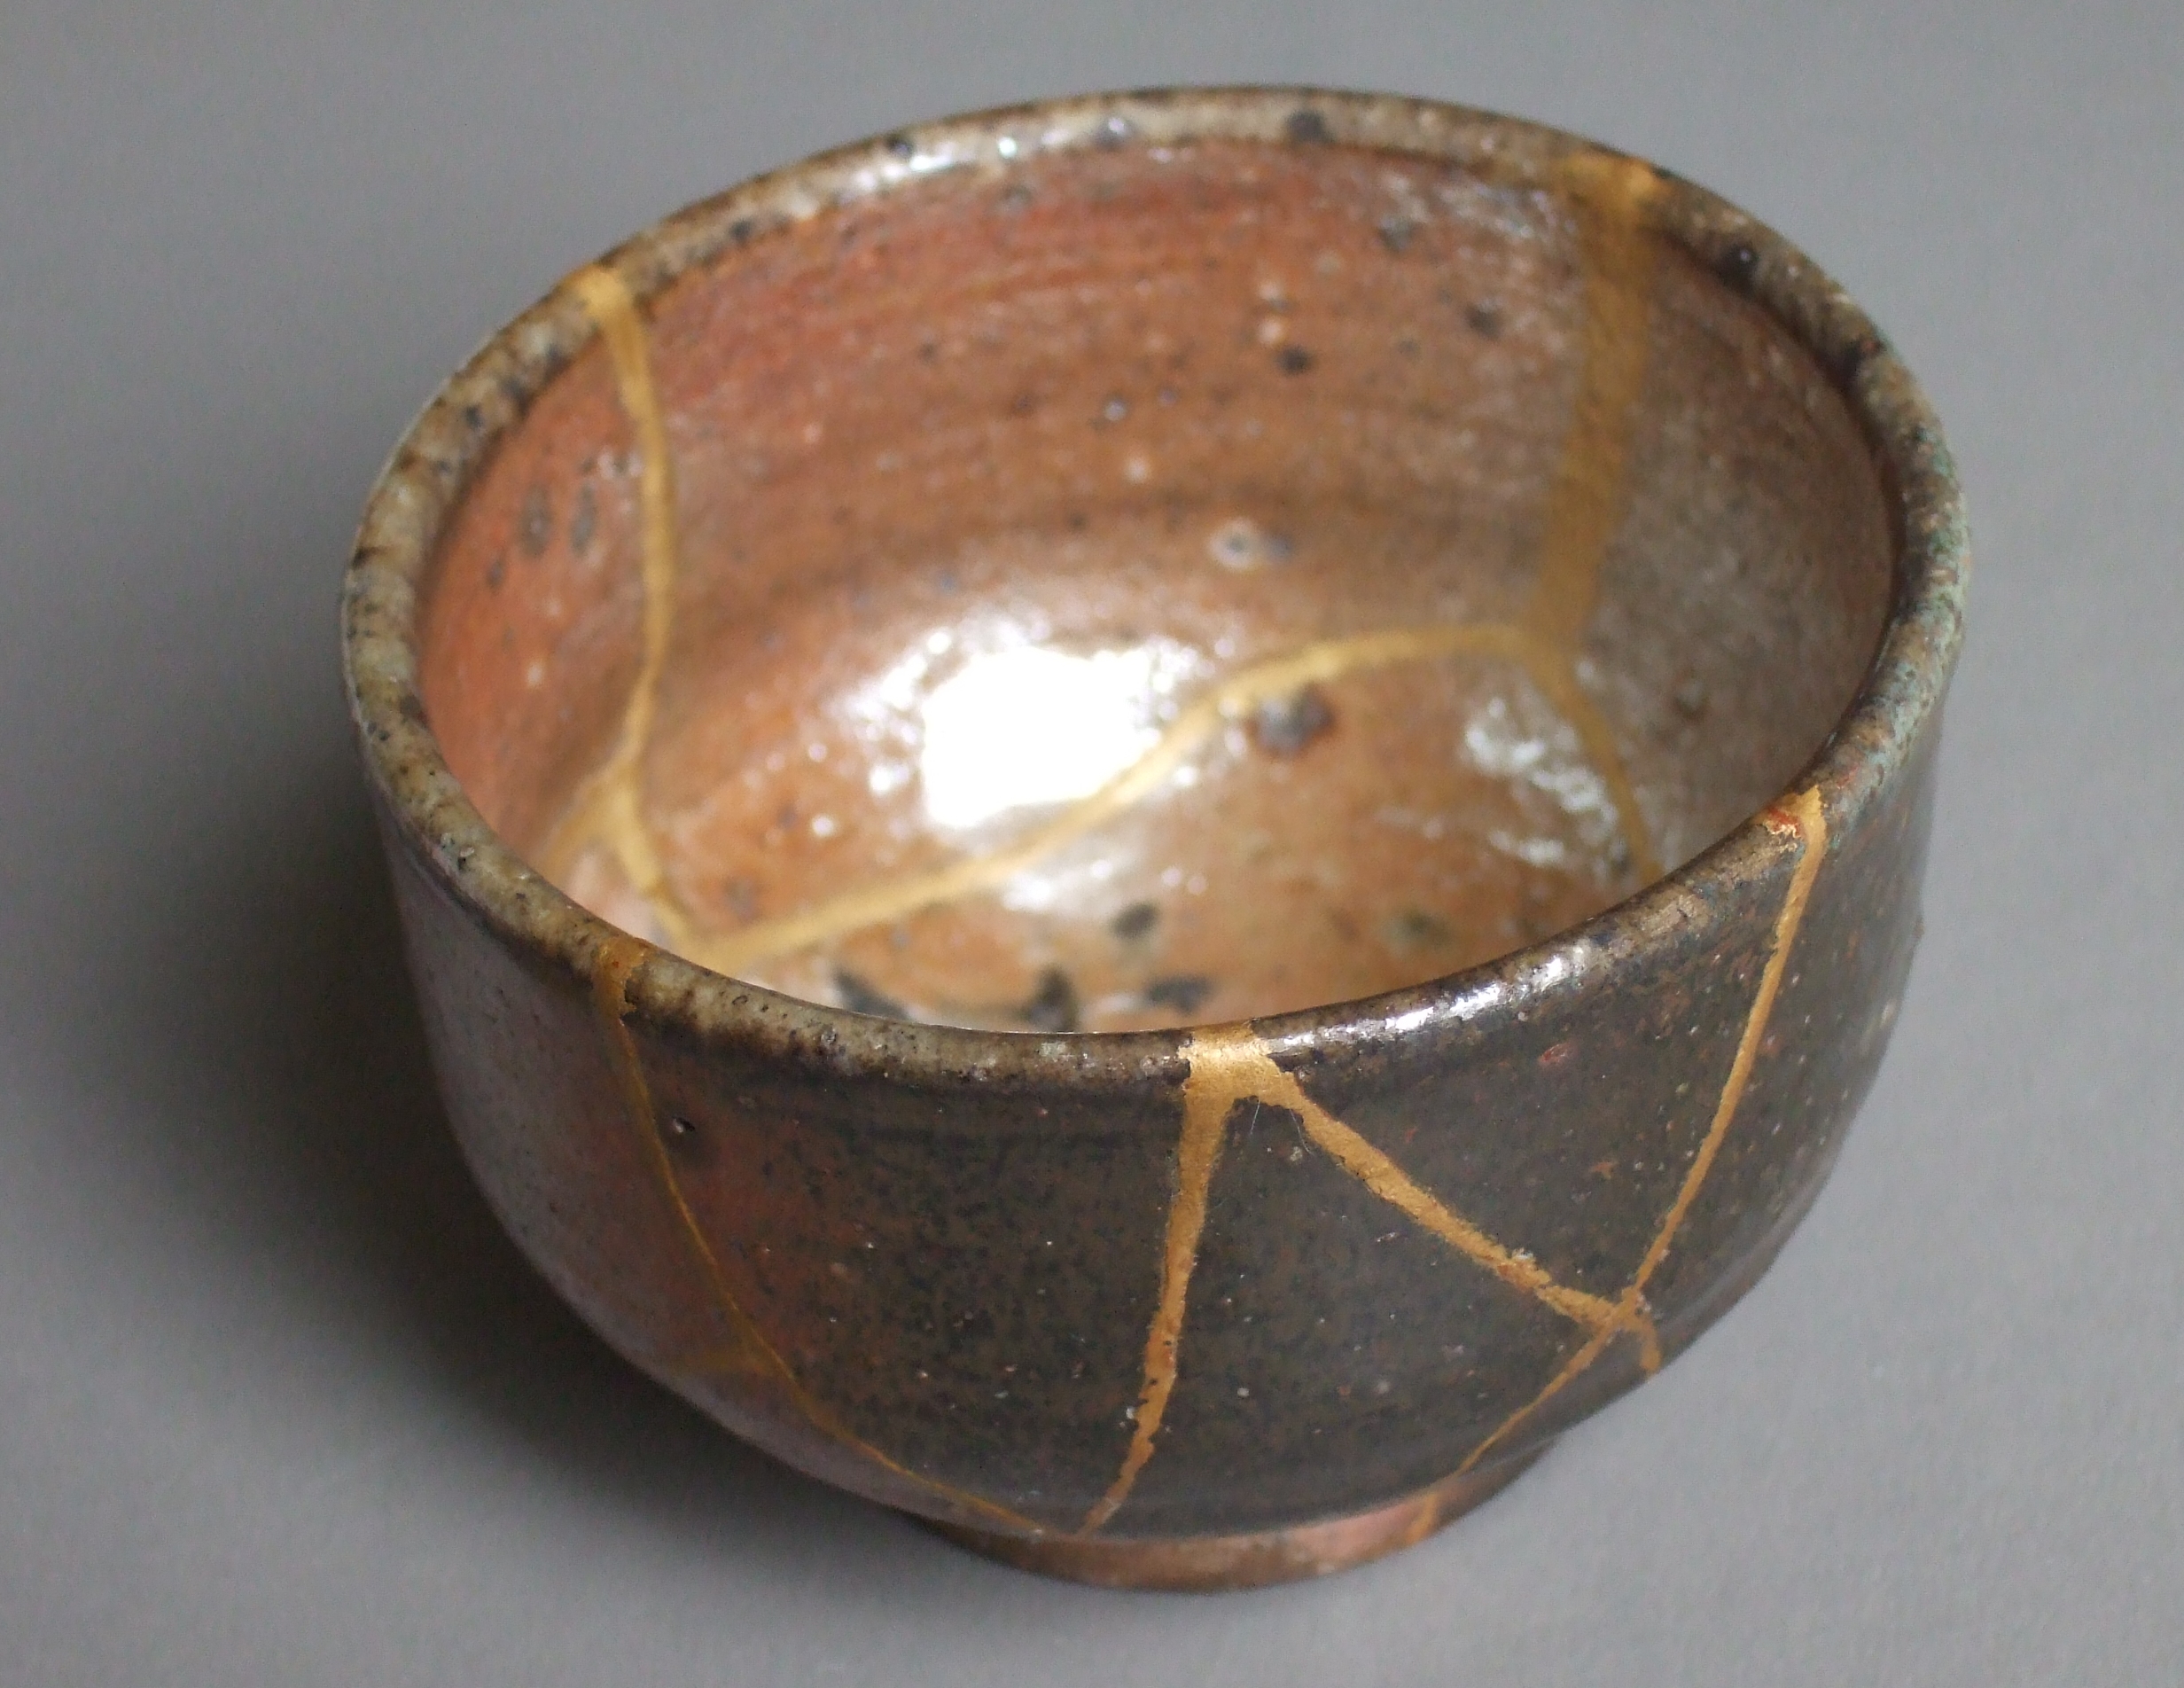 A pottery bowl with seams of gold showing where it's been made whole after breaking